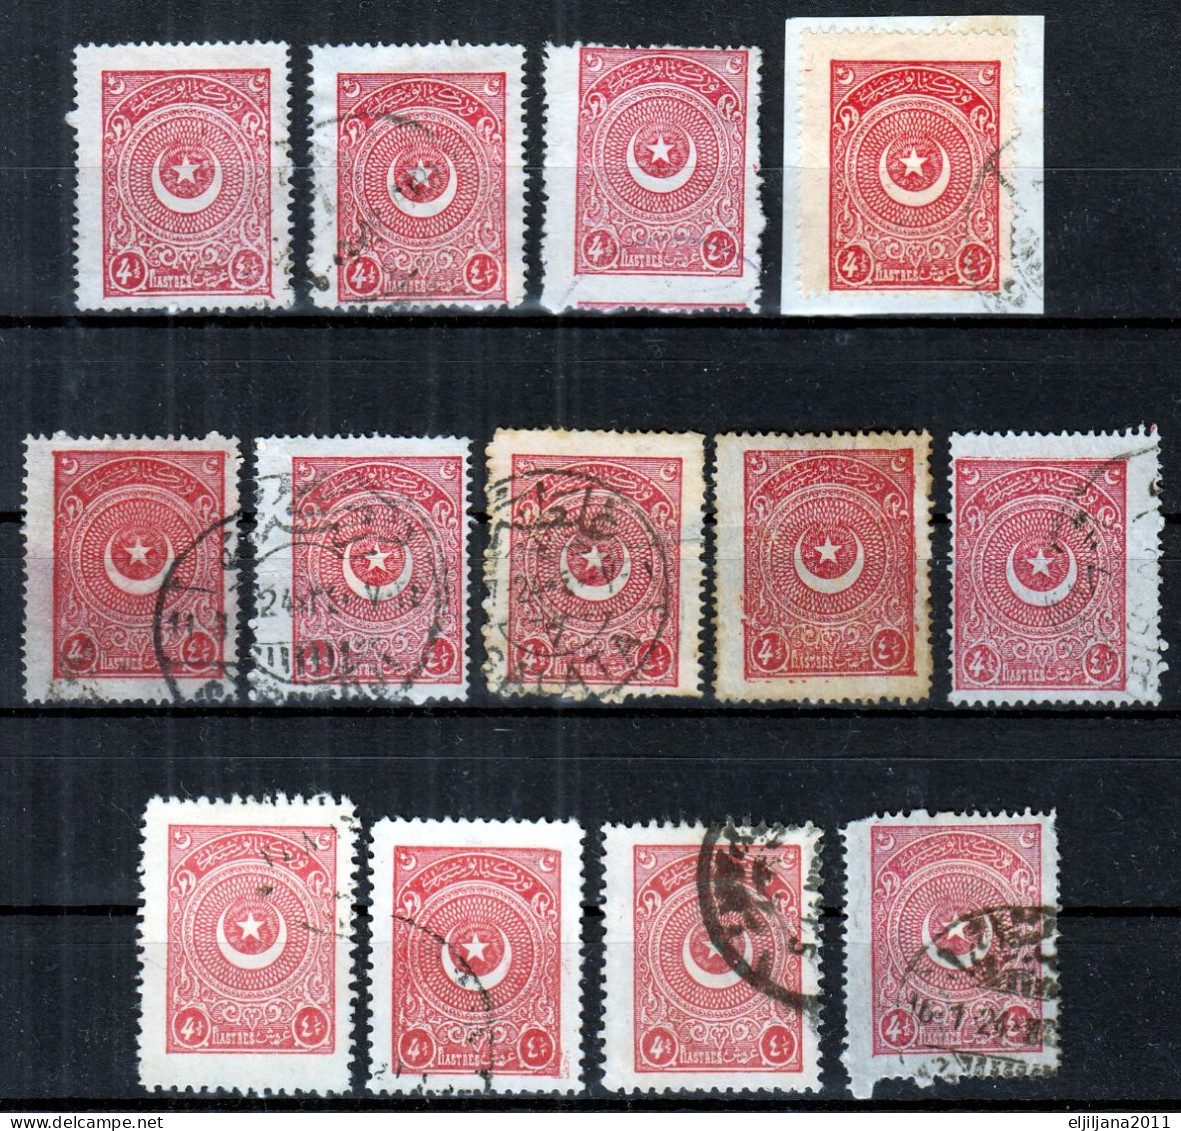 Turkey / Türkei 1923 - 1924 ⁕ Star & Crescent 4½ Pia. Mi.814, 831 ⁕ 13v Used - Different Perf. - Shades - Used Stamps